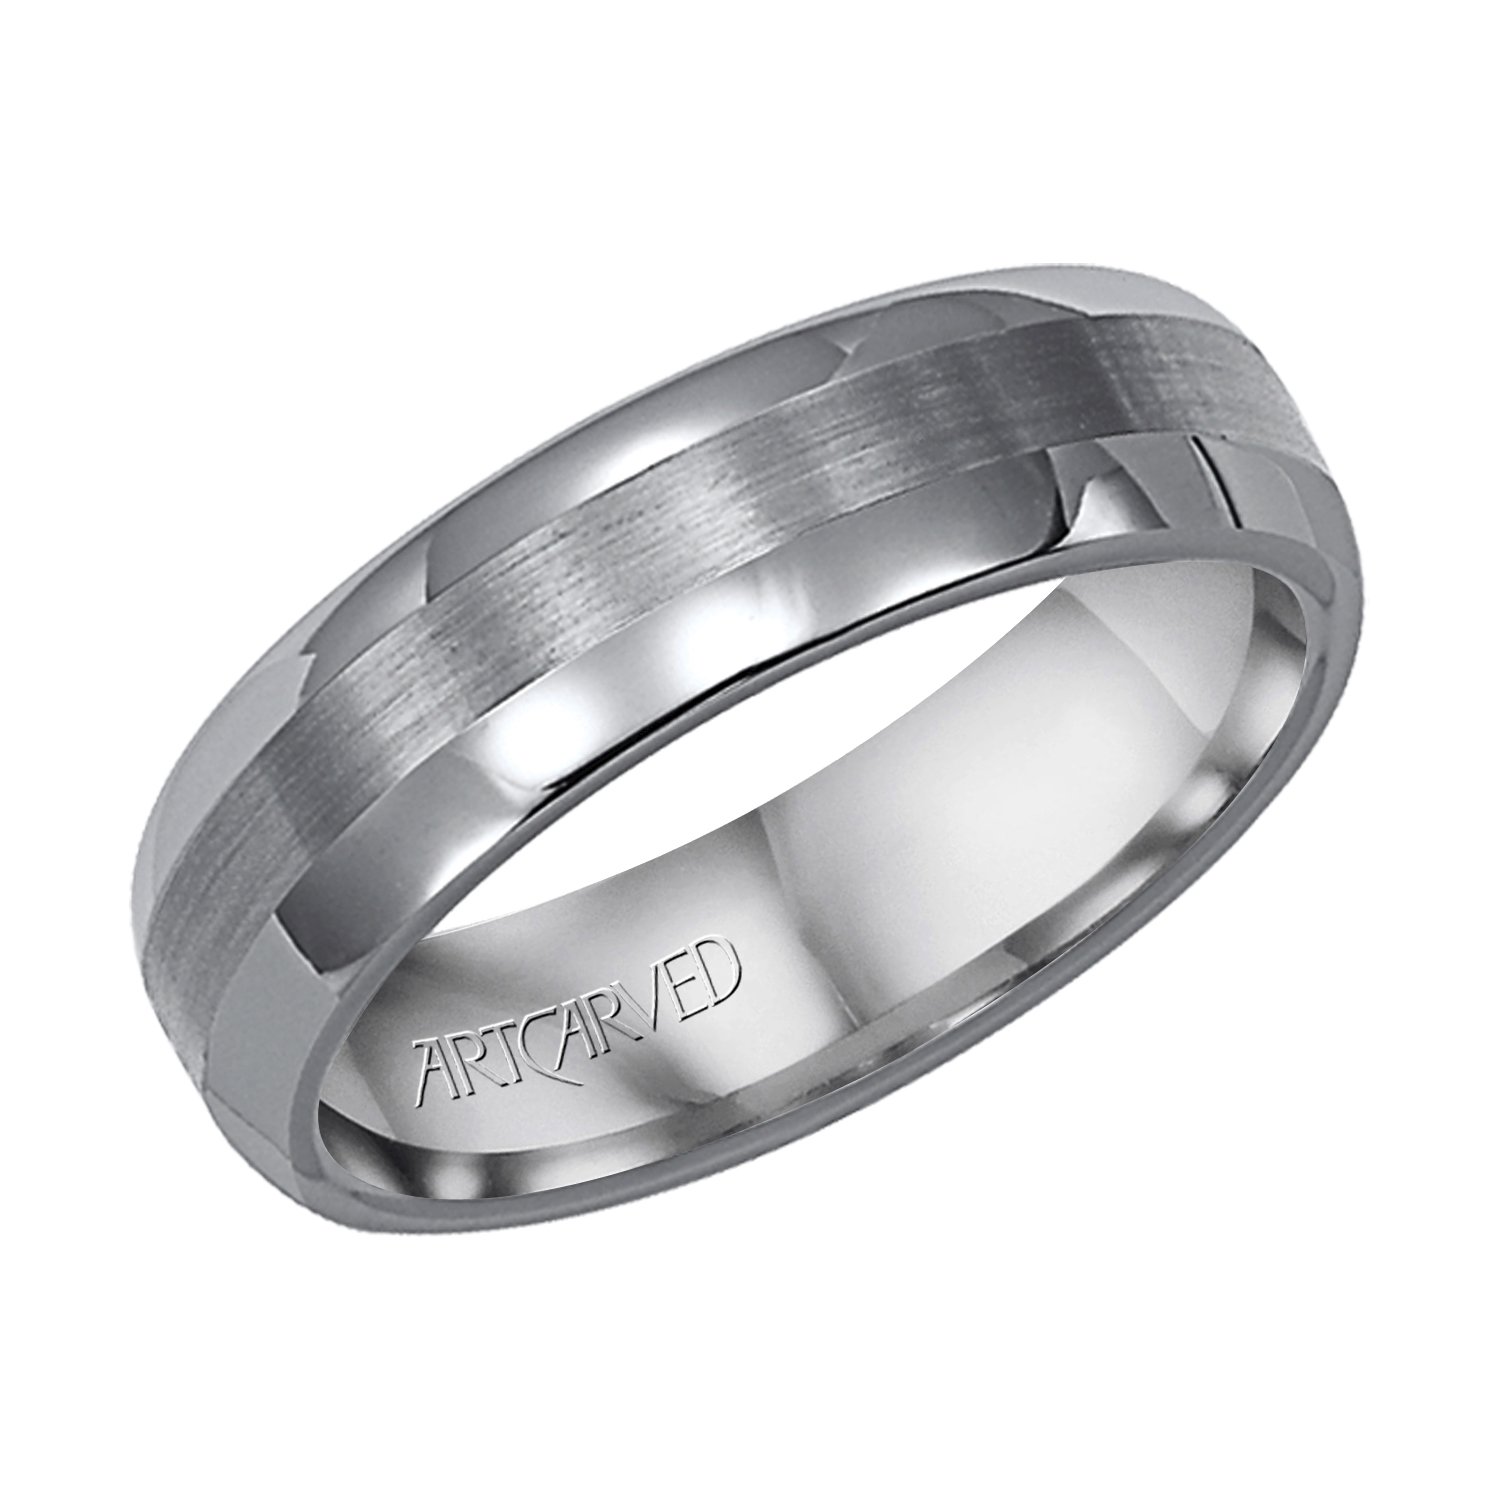 Artcarved Titanium Centurion Grooved Center Bead 7mm Band Ring 